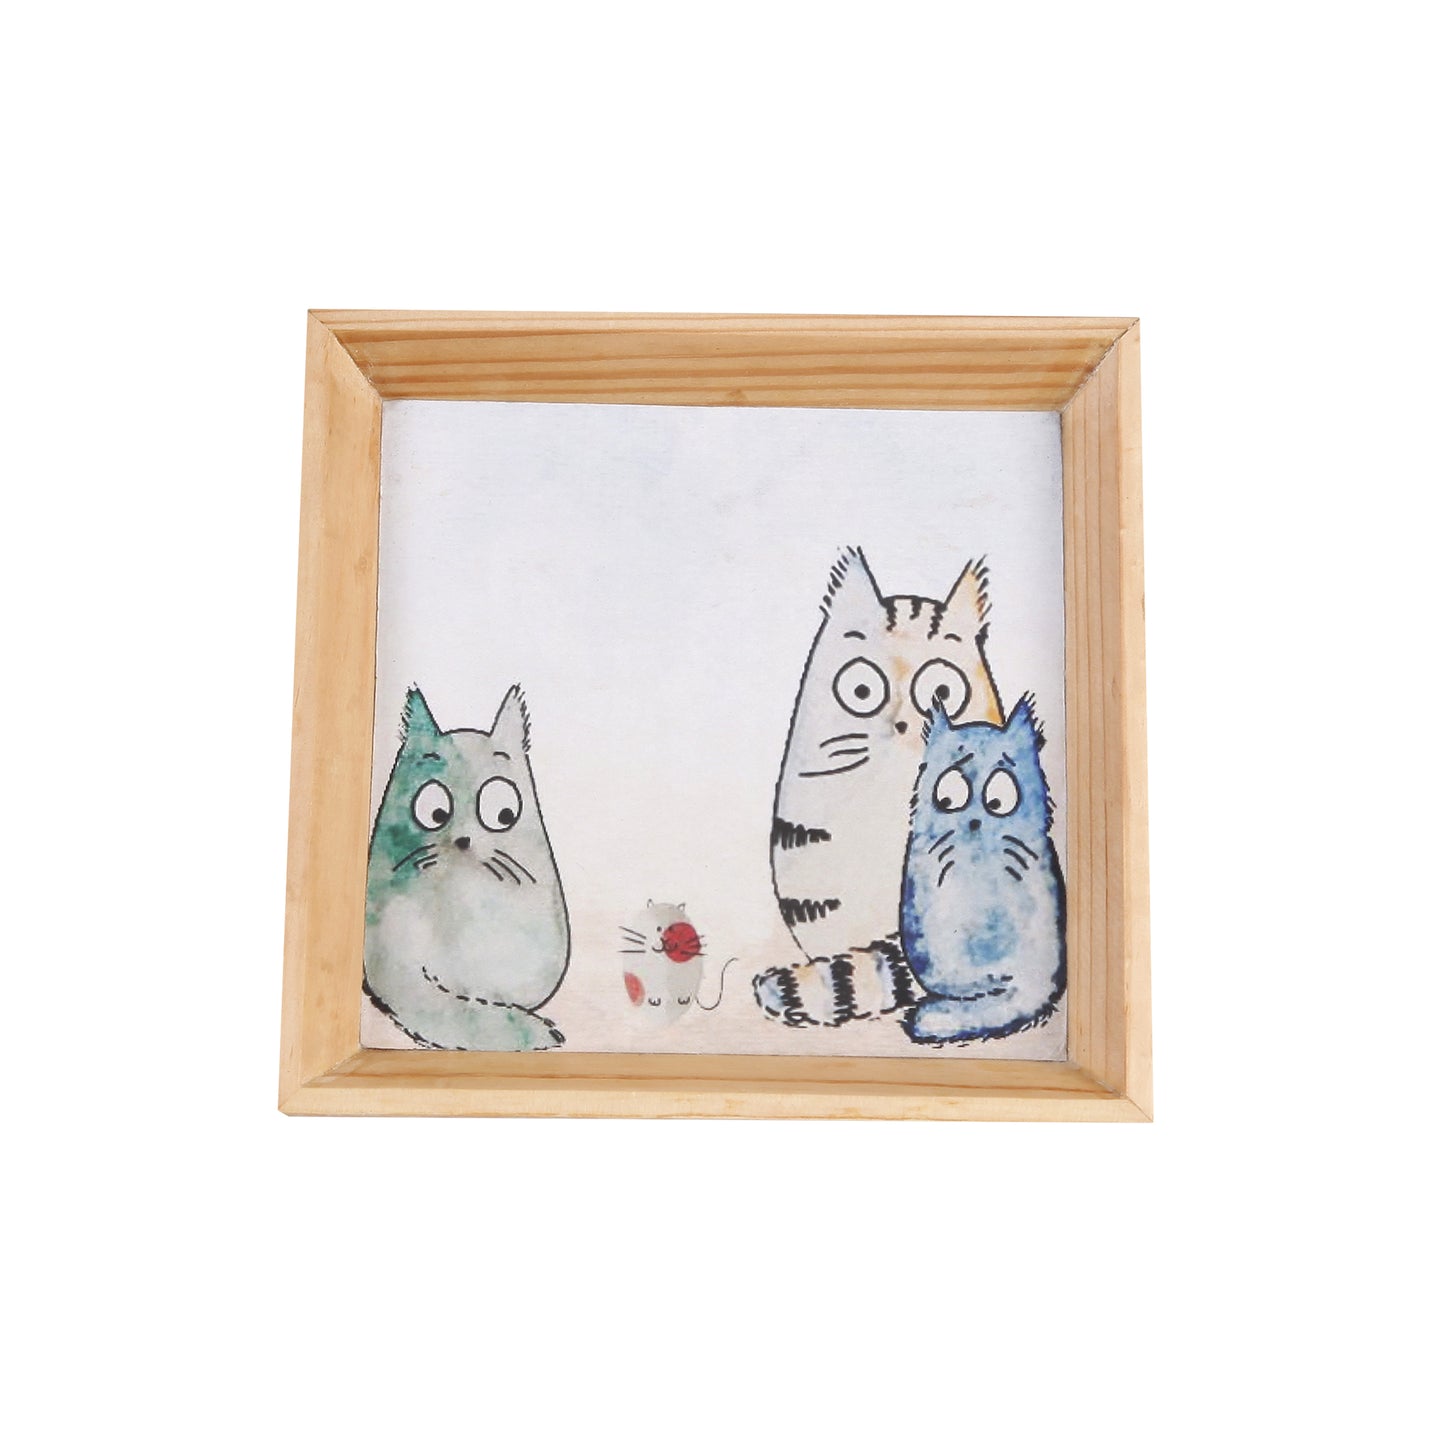 A Tiny Mistake Happy Cats Small Square Wooden Serving Tray, 18 x 18 x 2 cm